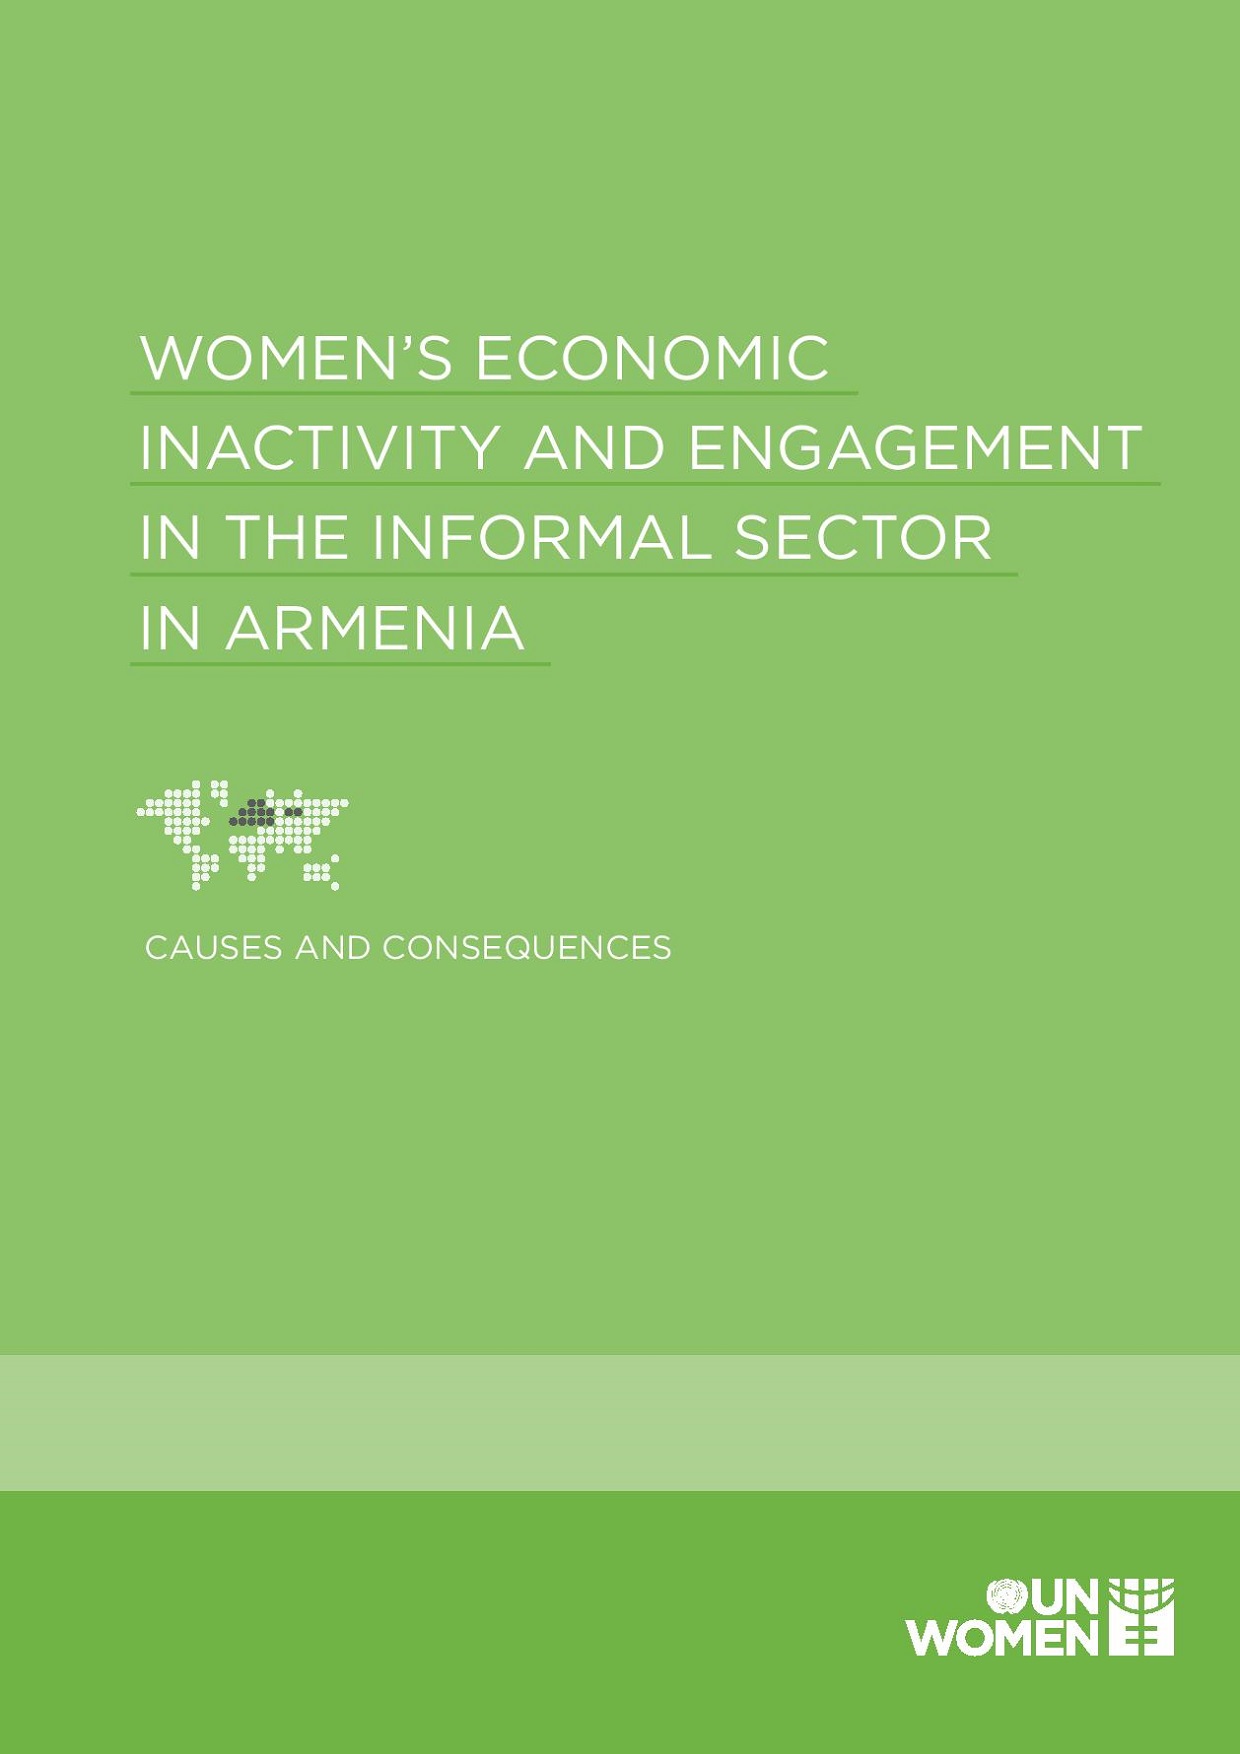 Women’s Economic Inactivity and Engagement in the Informal Sector in Armenia